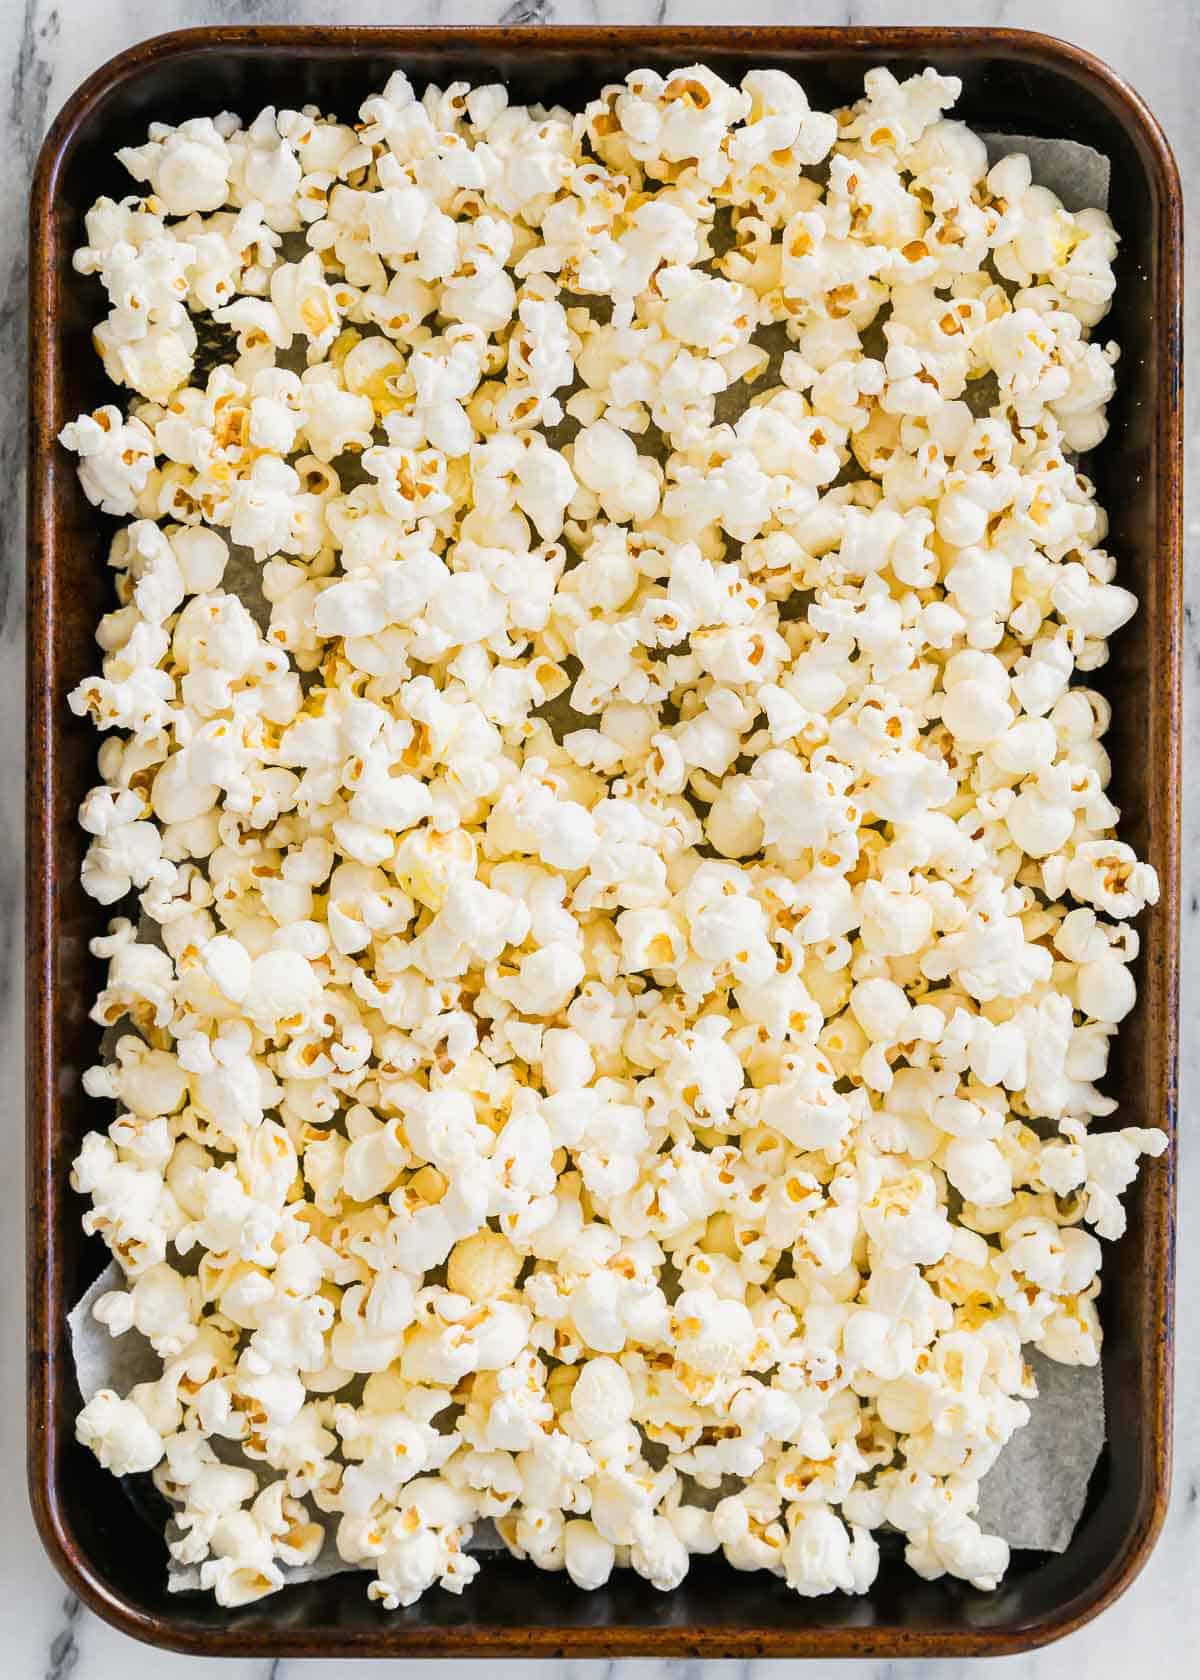 Popcorn in a baking pan on a marble countertop.